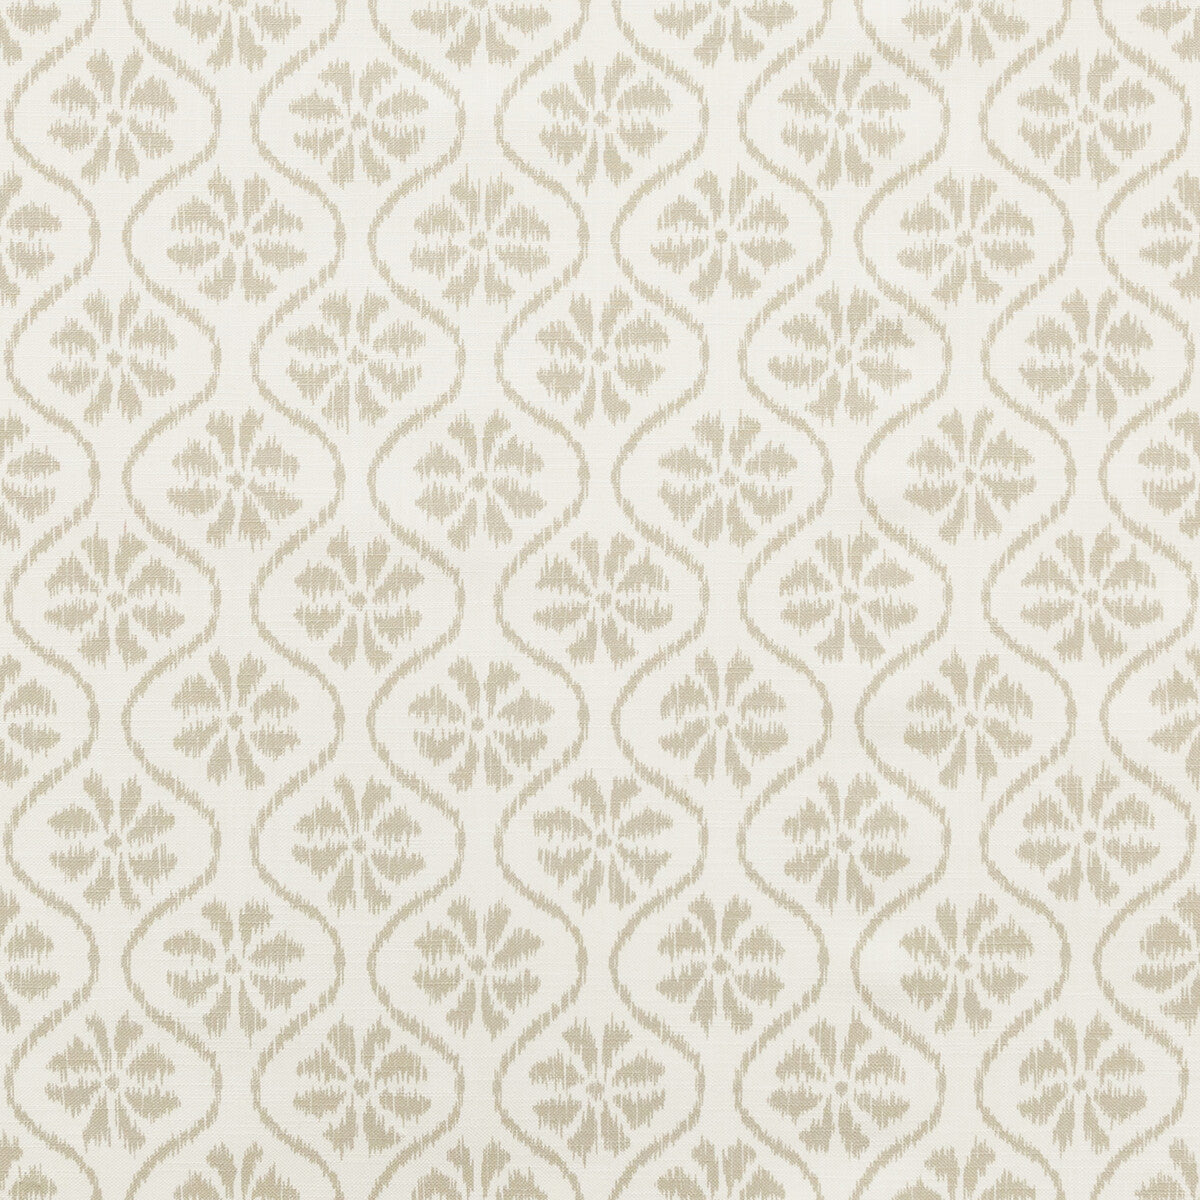 Talara fabric in sand color - pattern TALARA.16.0 - by Kravet Basics in the Ceylon collection